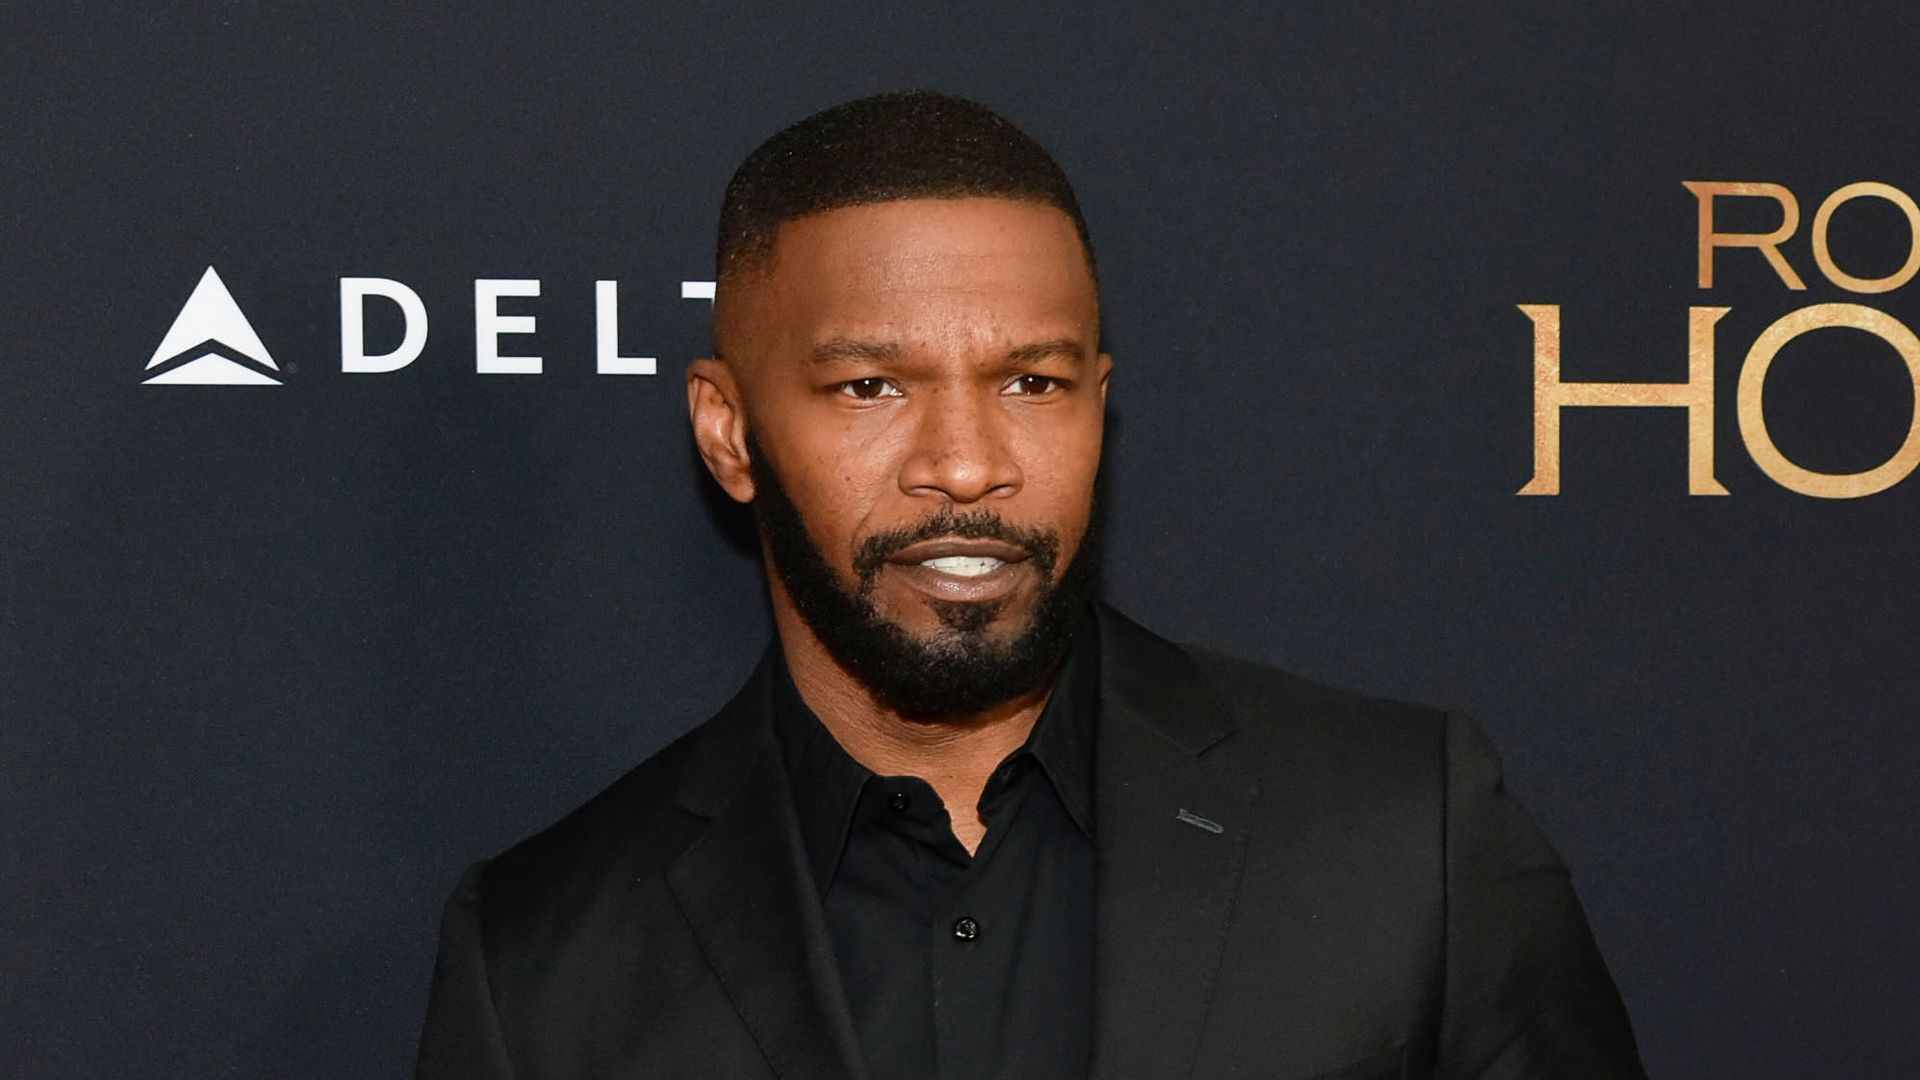 Jamie Foxx poses on the red carpet at "Robin Hood" New York Screening  at AMC Lincoln Square Theater on November 11, 2018 in New York City